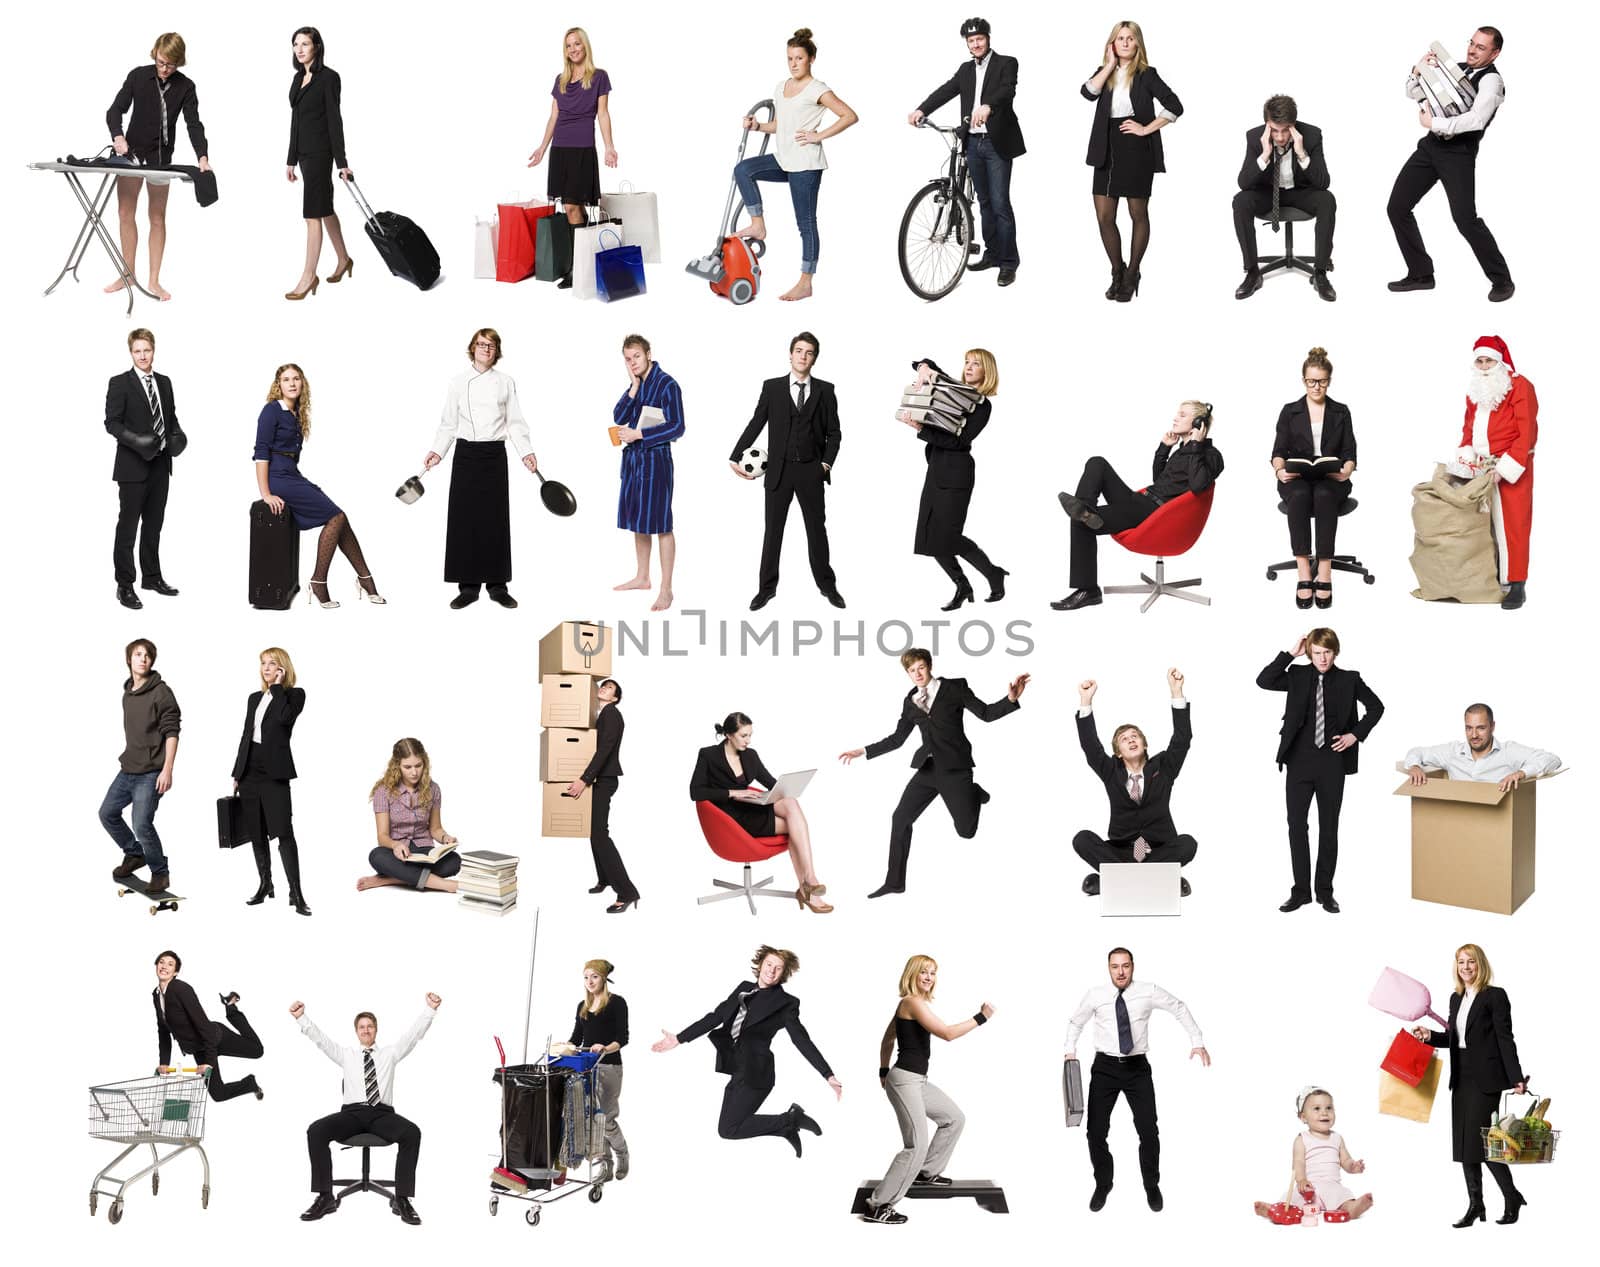 Collage of active people isolated on white background